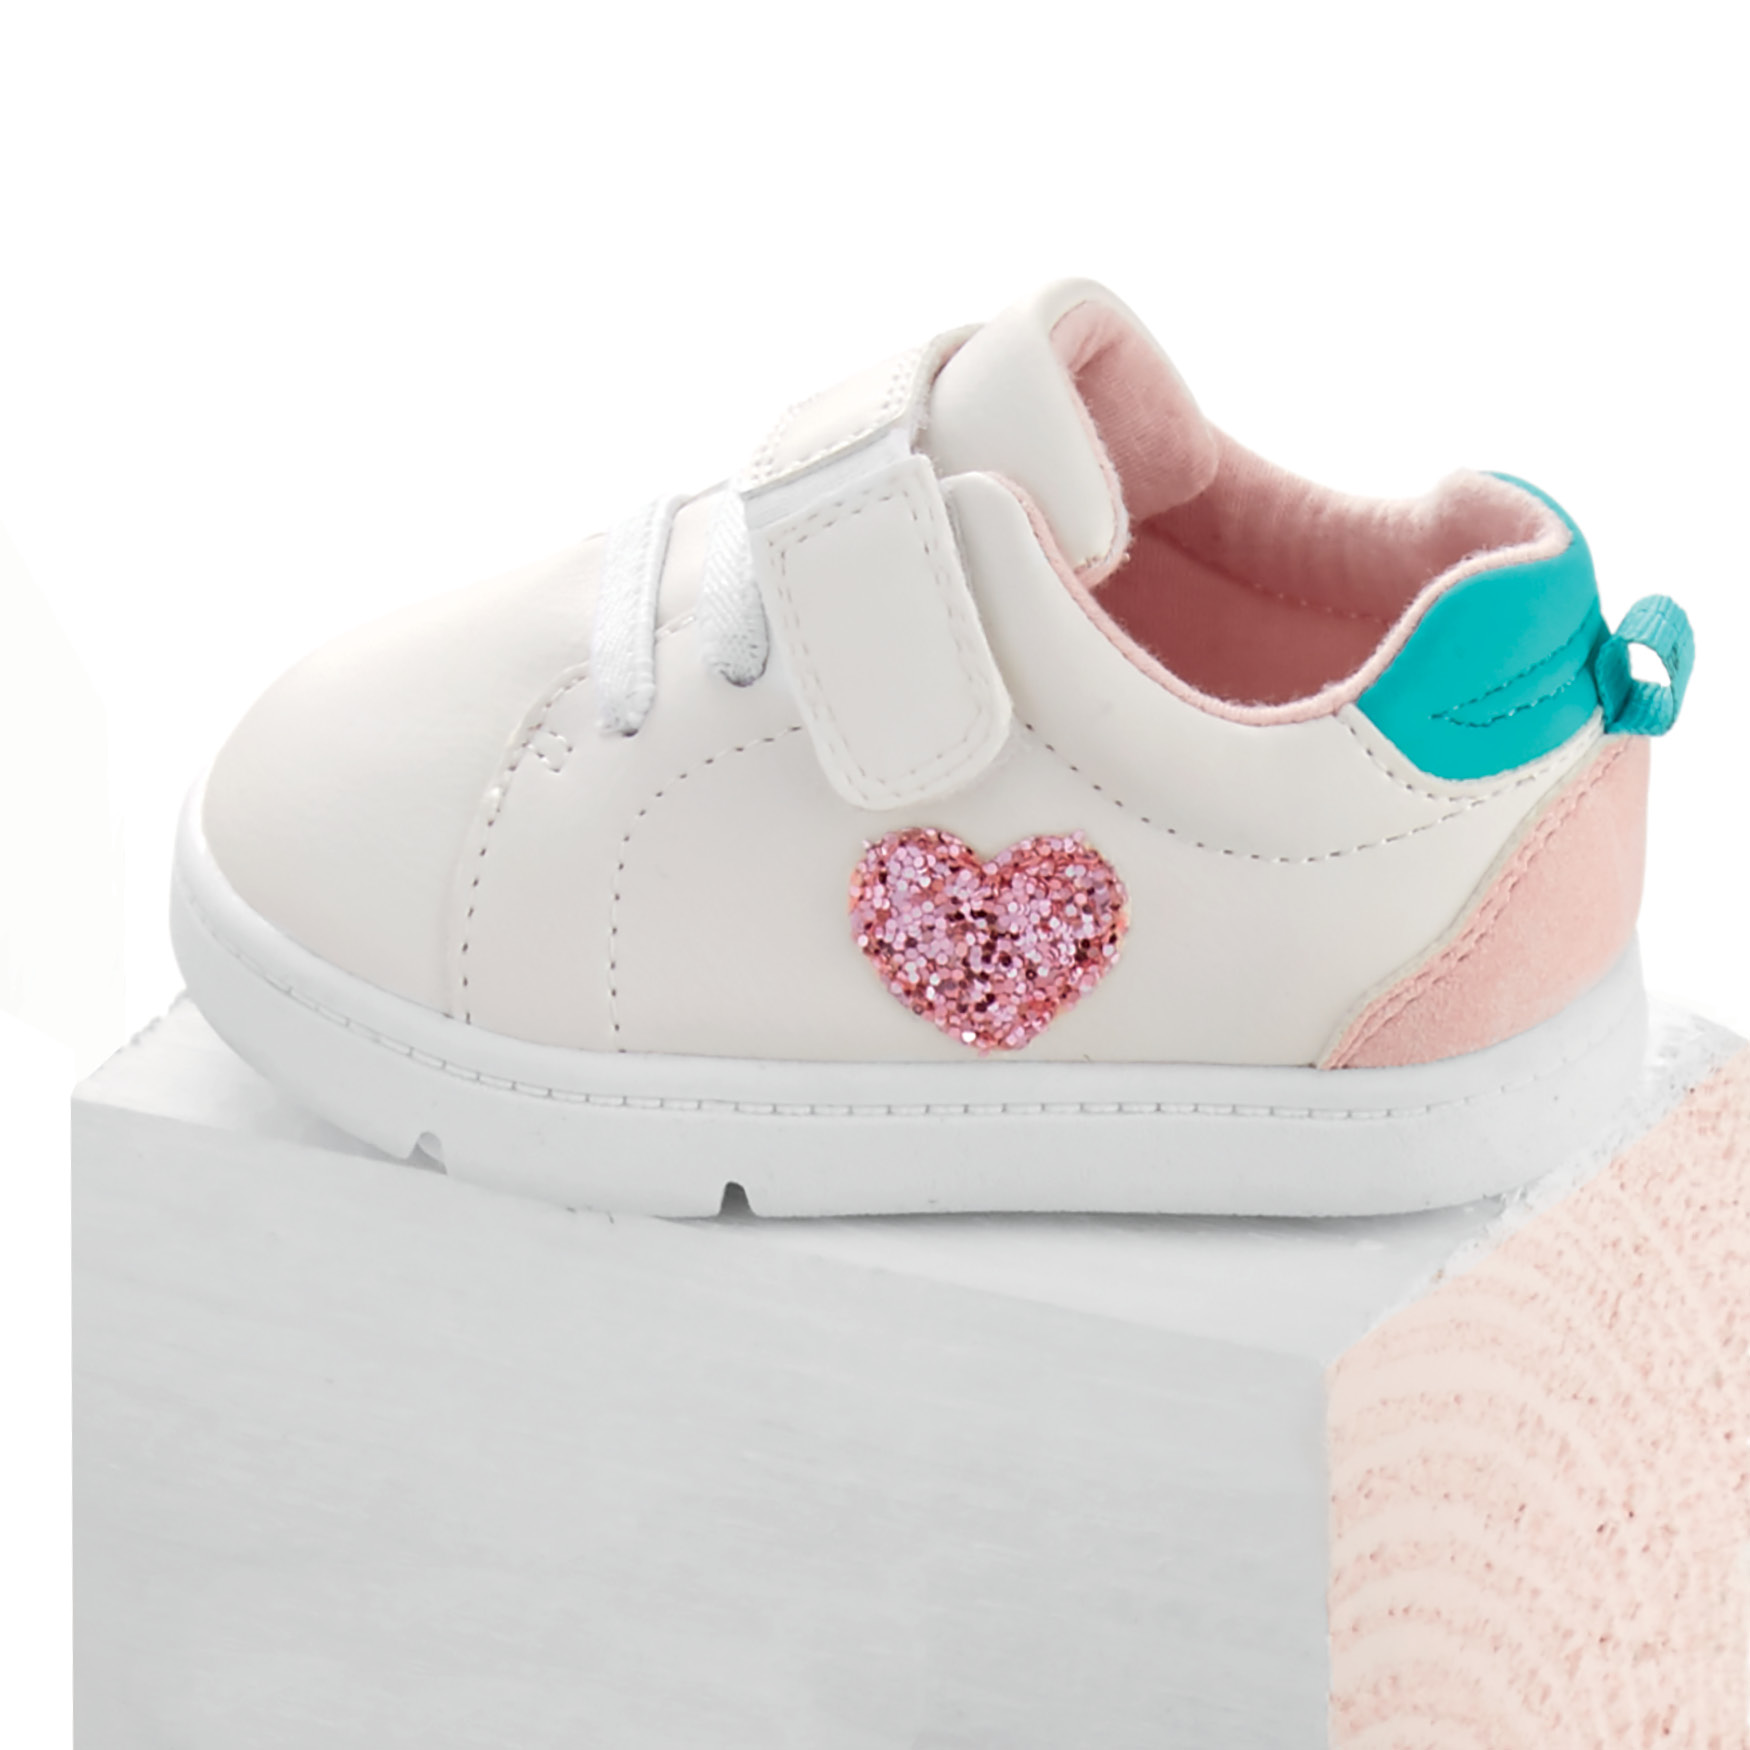 A Buyer's Guide to Baby Walking Shoes 